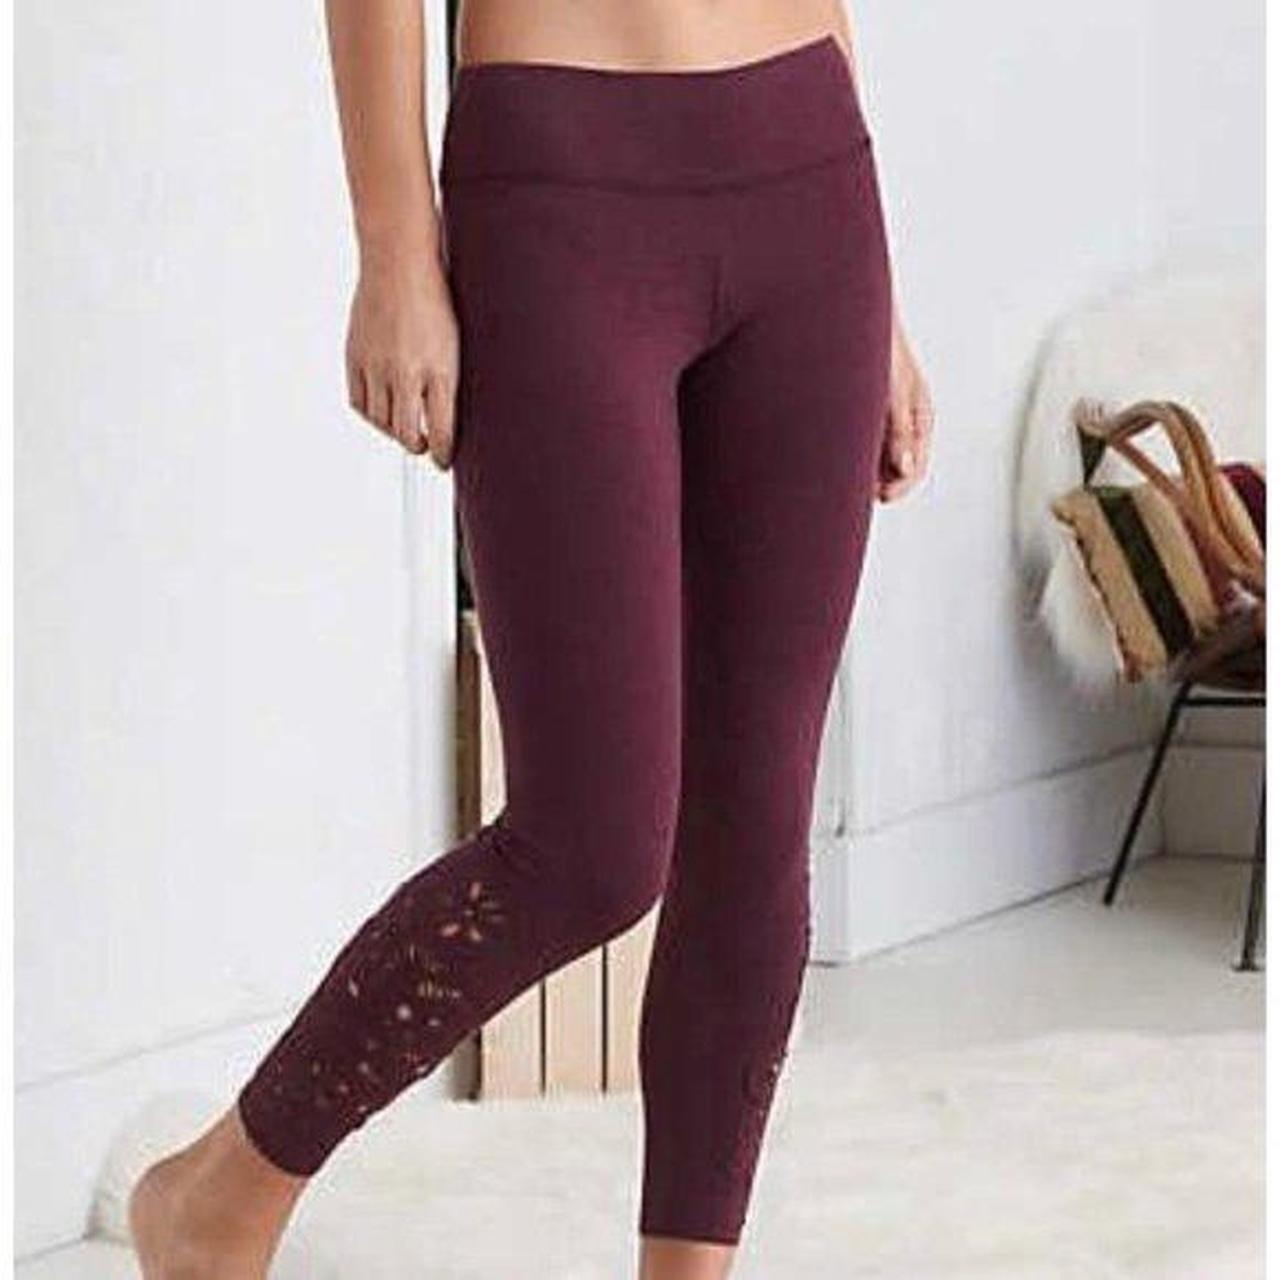 Aerie Chill Play Move Leggings, Burgundy Color, High Waisted, Size Small 